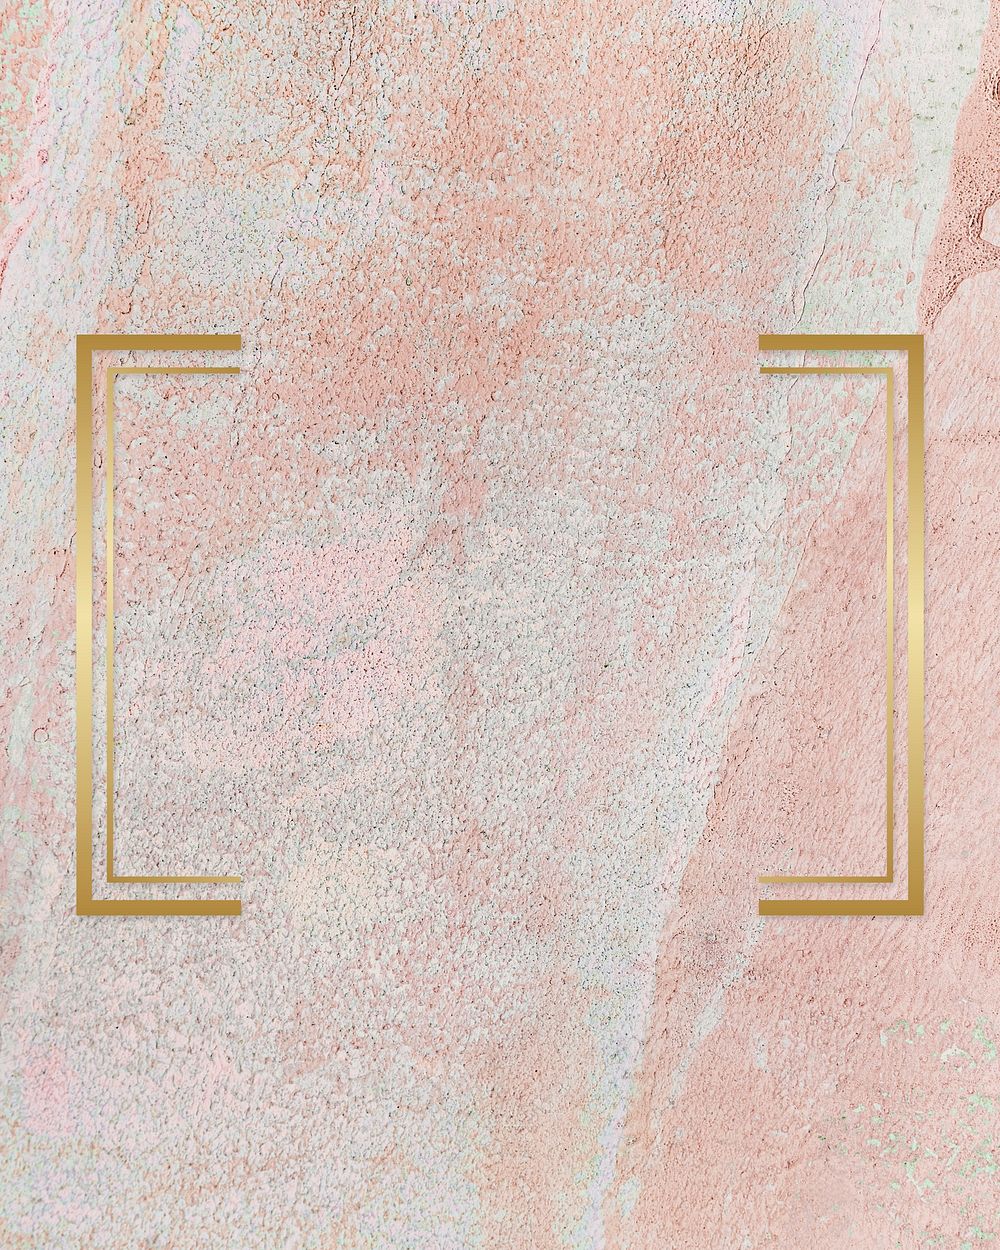 Gold square frame on a rustic pastel pink background